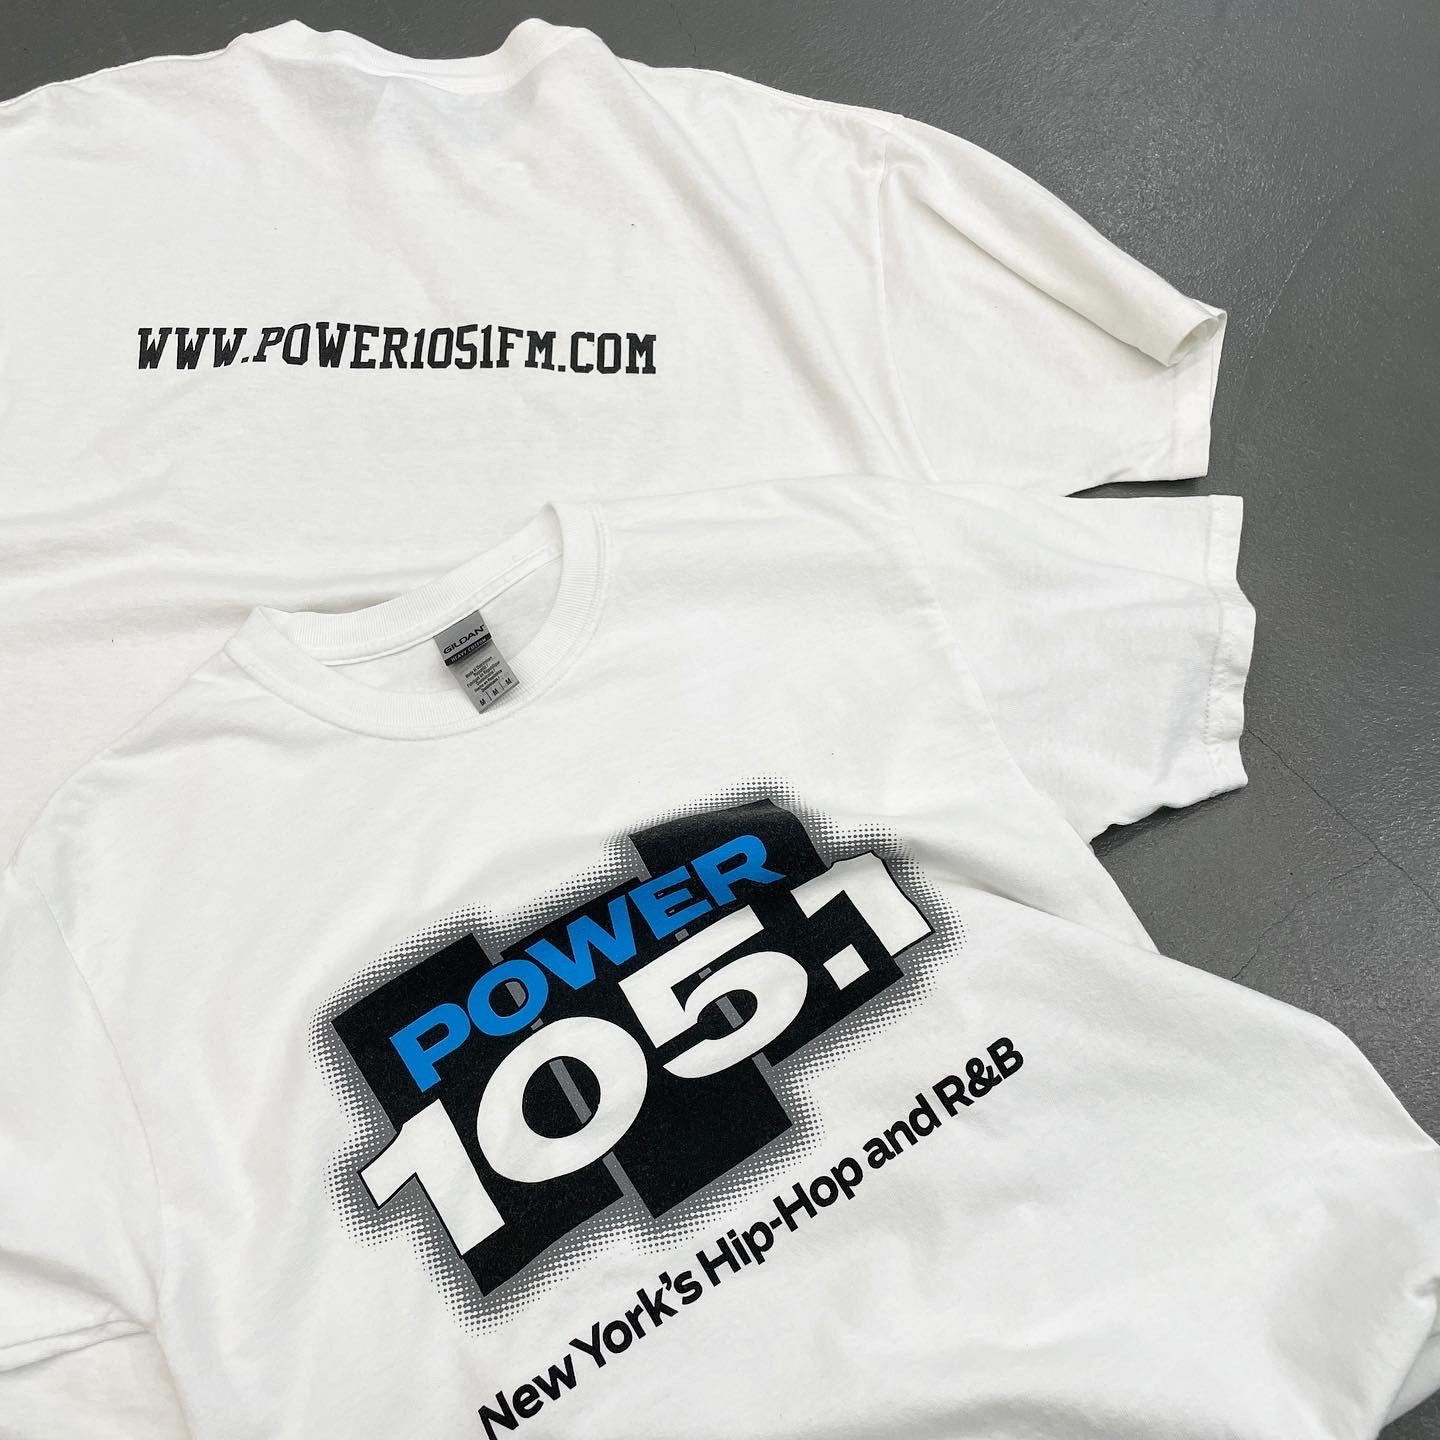 Power 105.1 Promotion S/S Tee